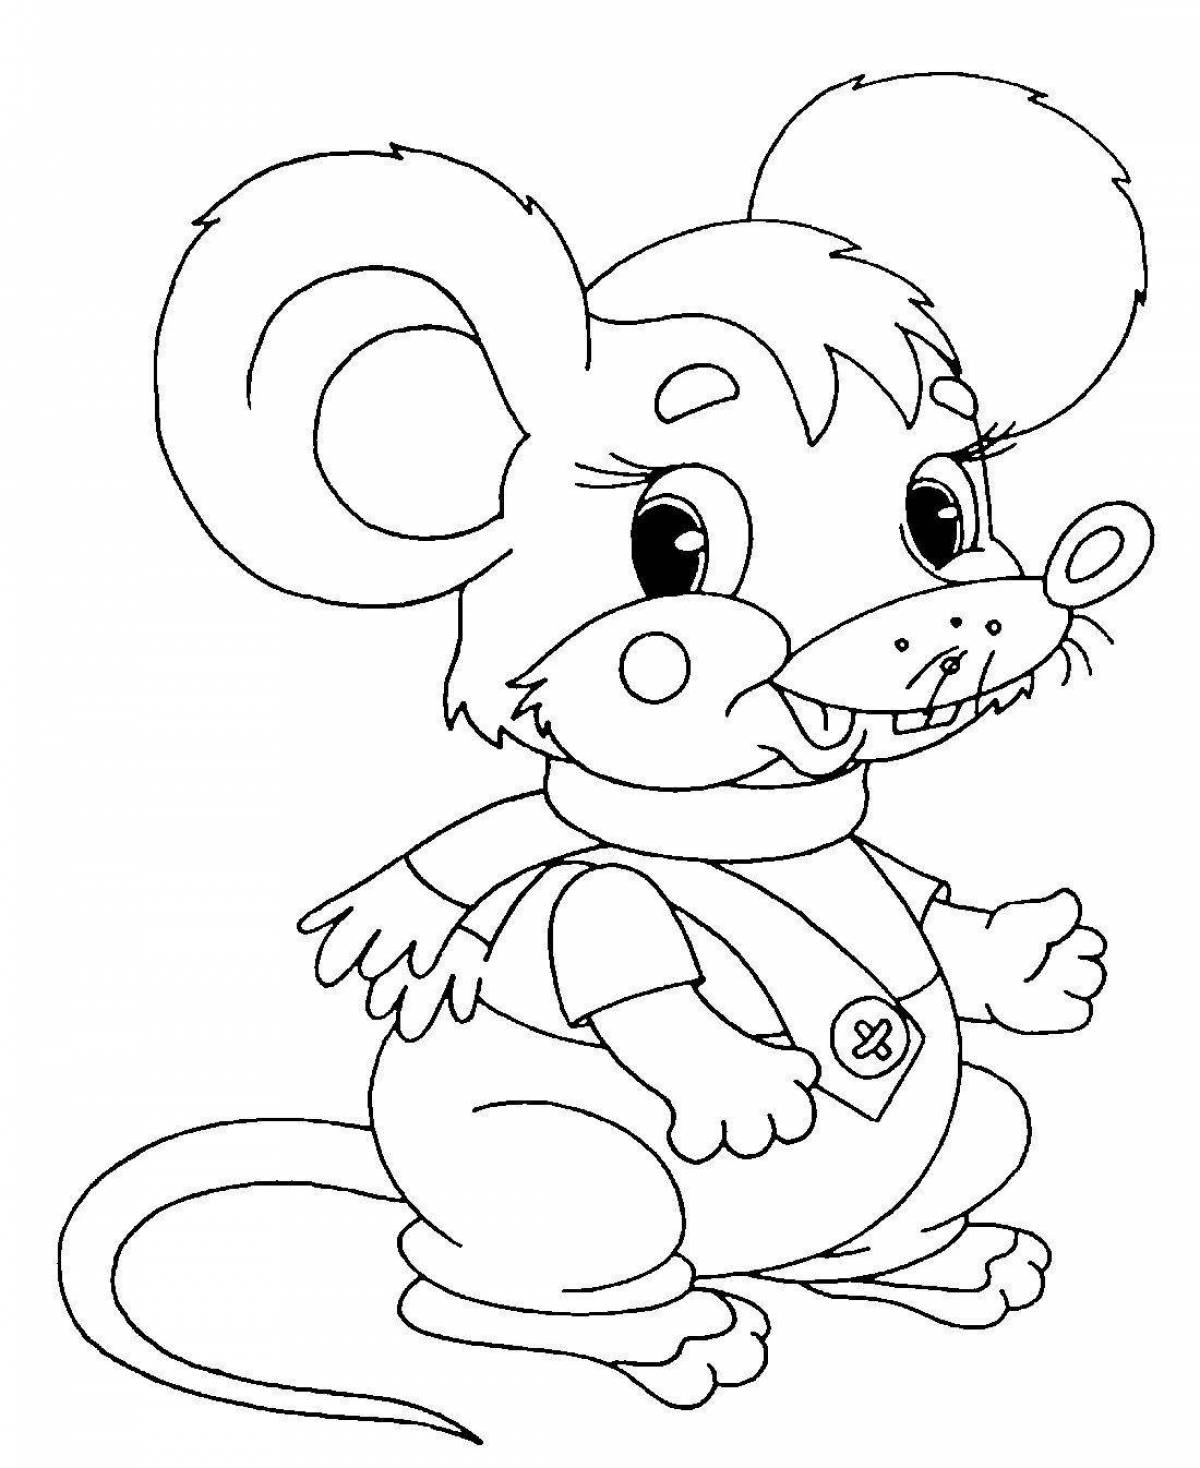 Colouring awesome mouse tim